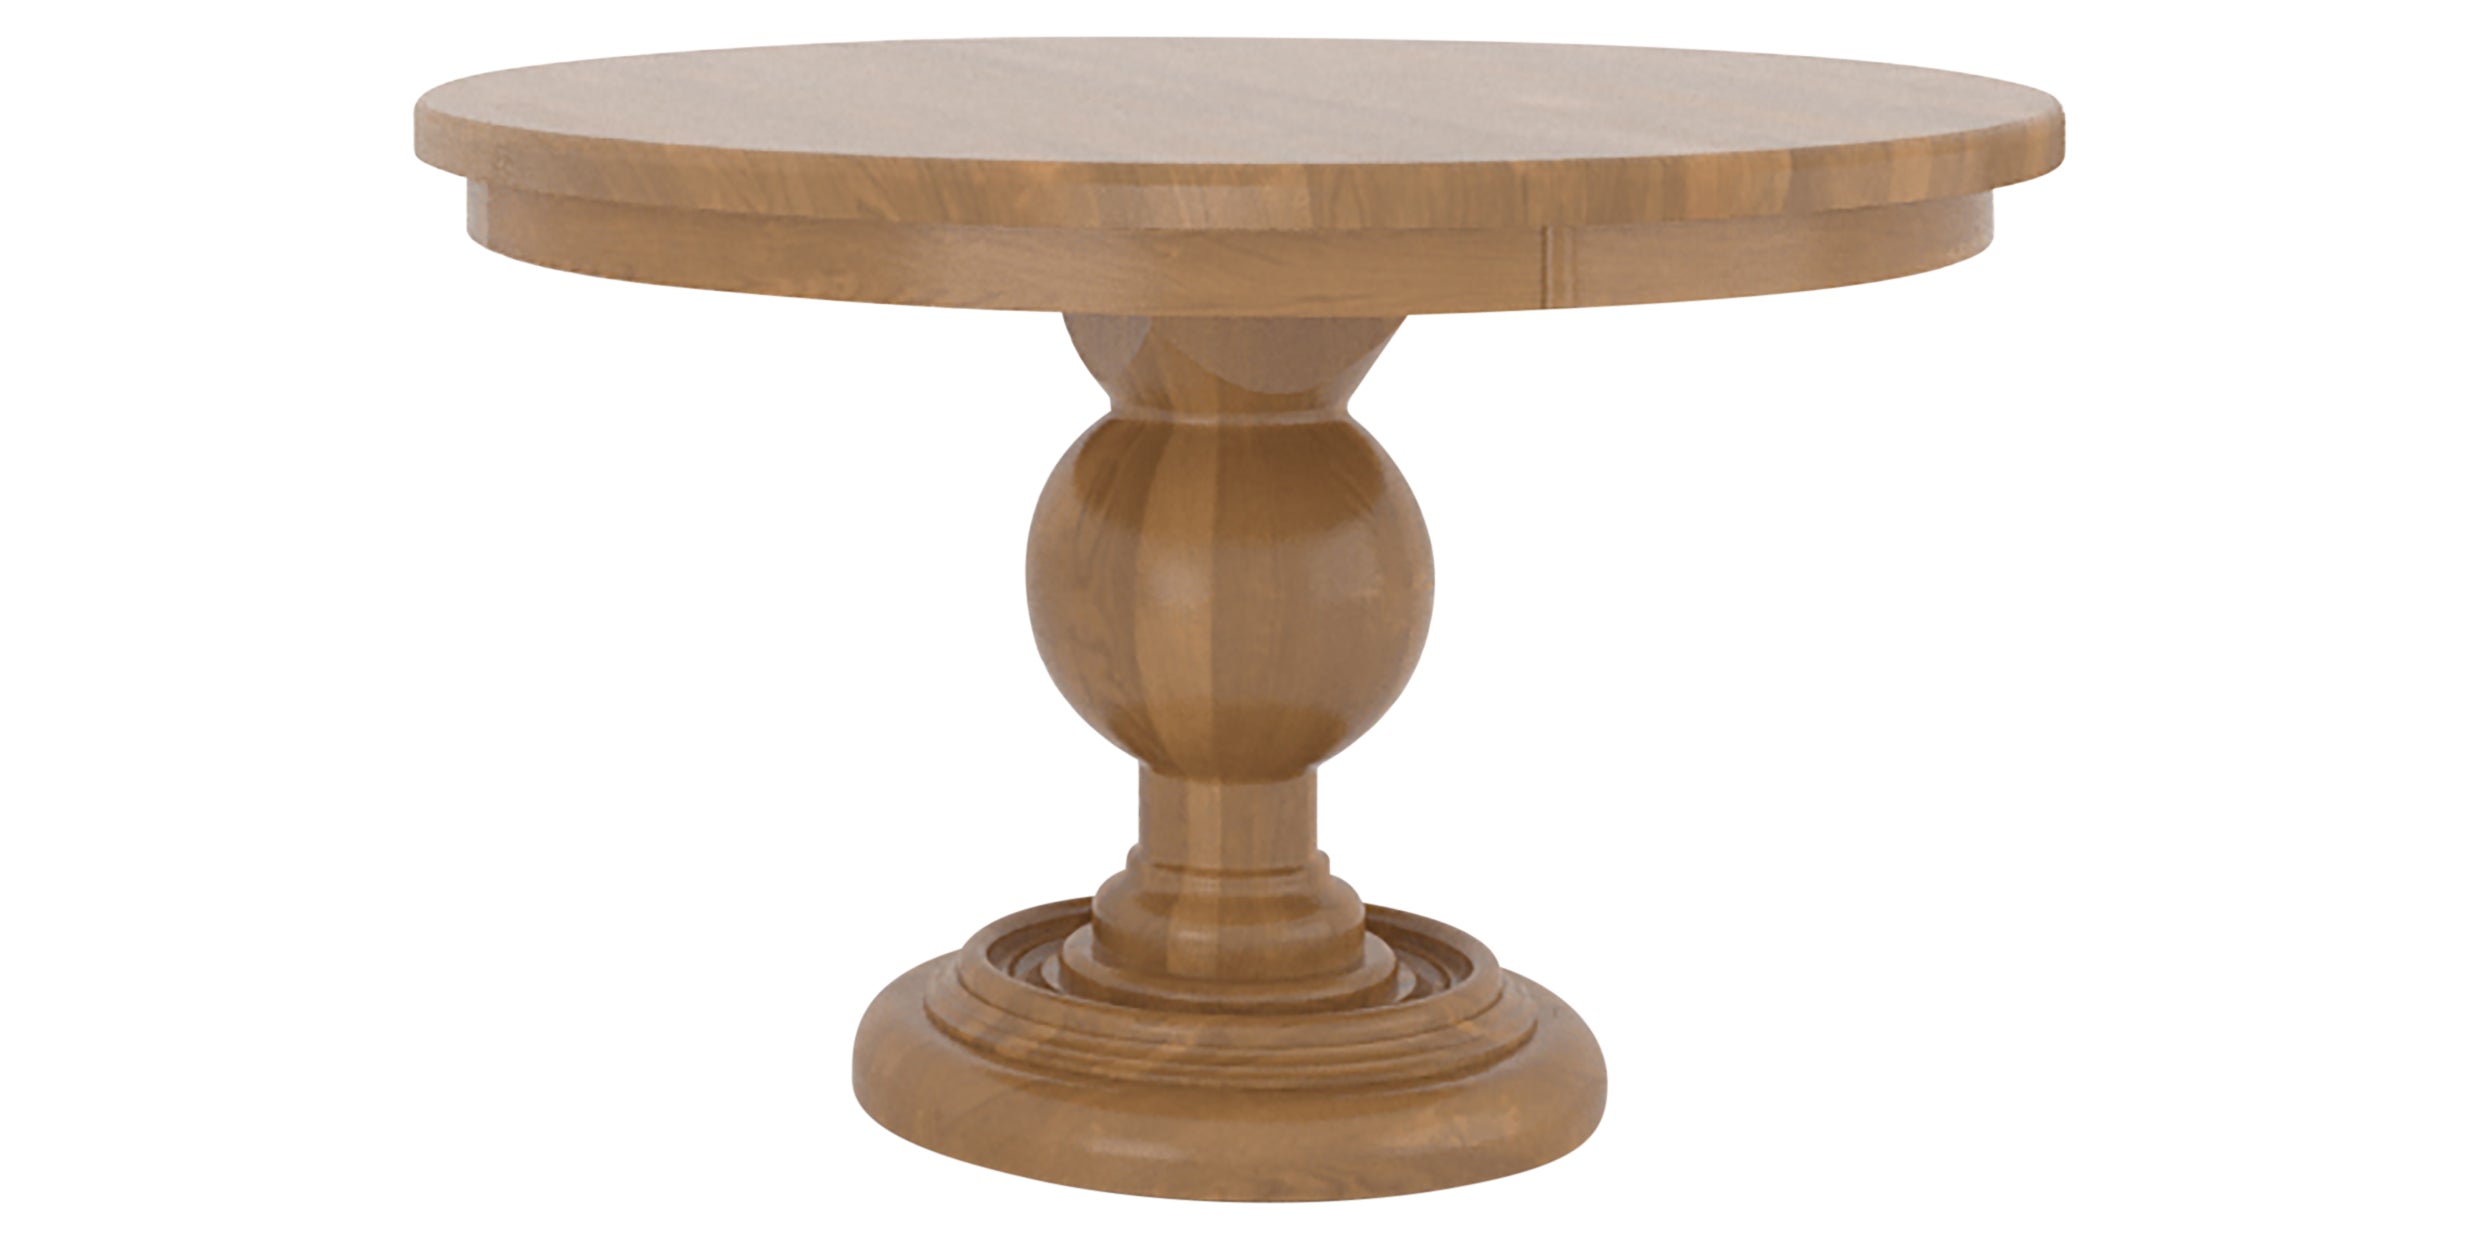 01 Honey Washed | Canadel Farmhouse Chic Dining Table 4848 | Valley Ridge Furniture